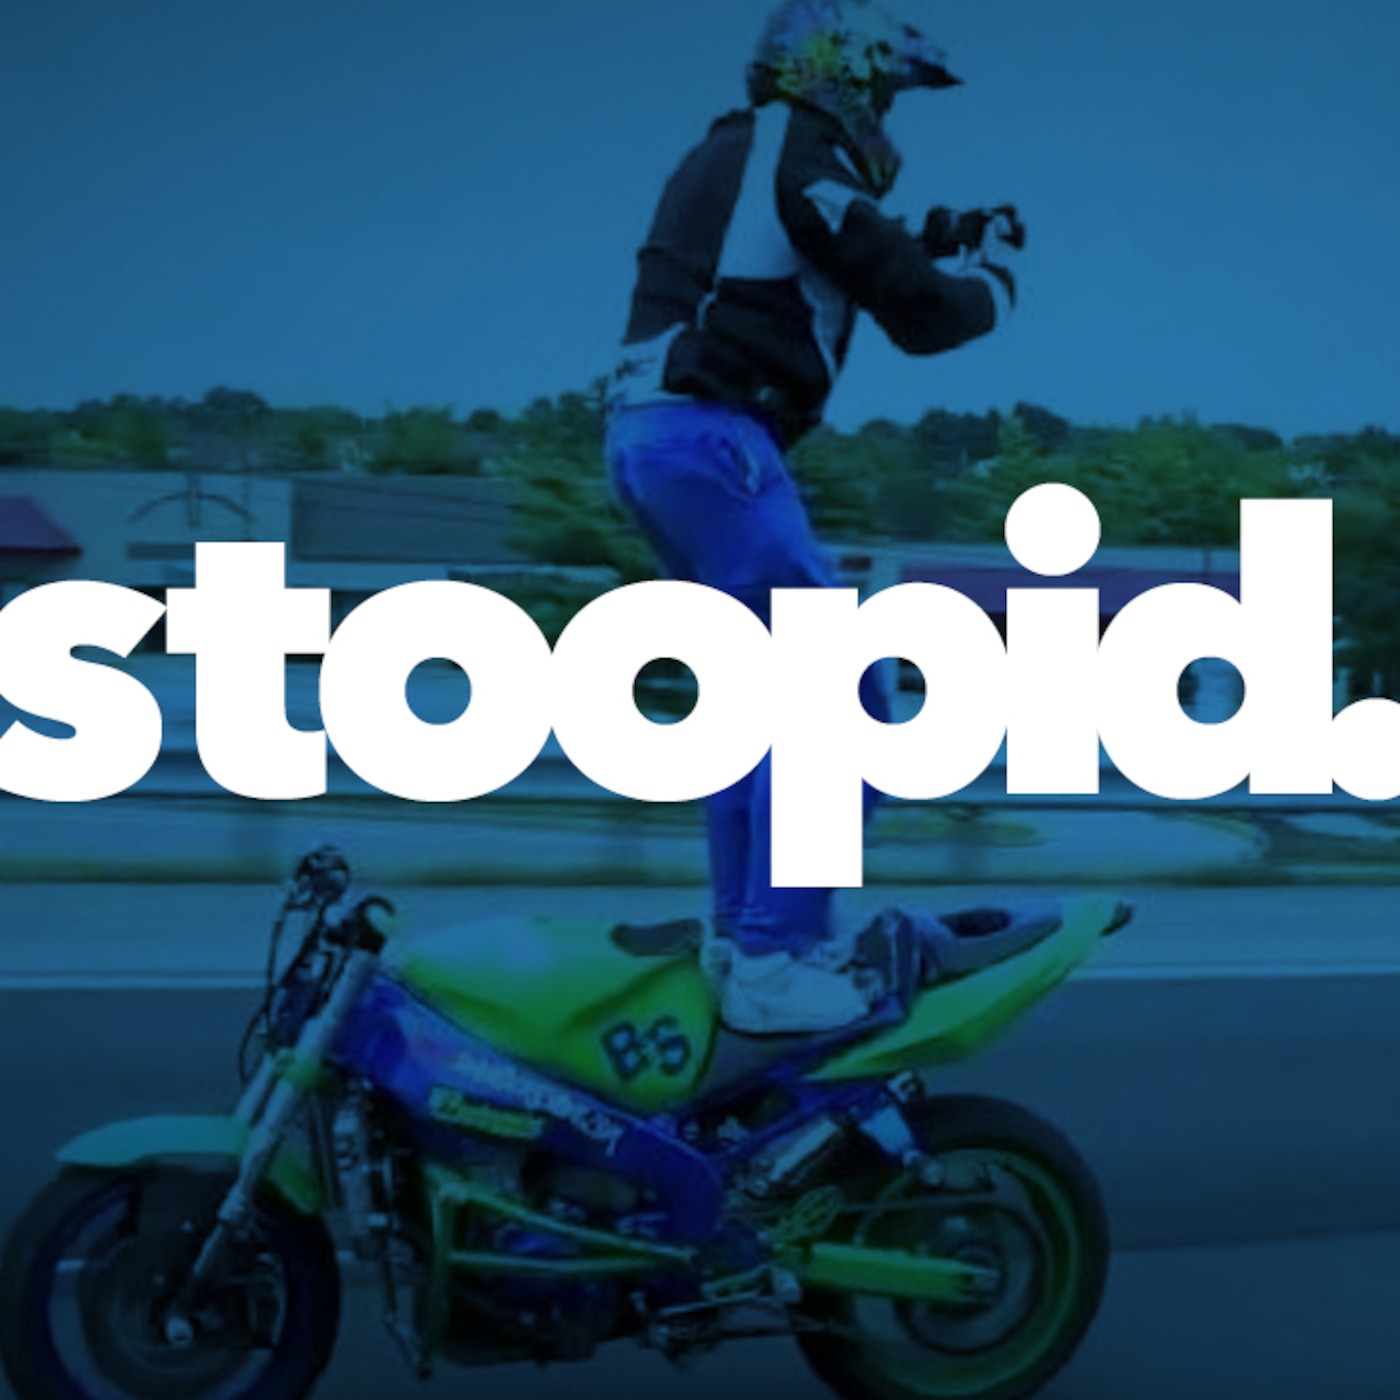 Stoopid Part 1: The new standard